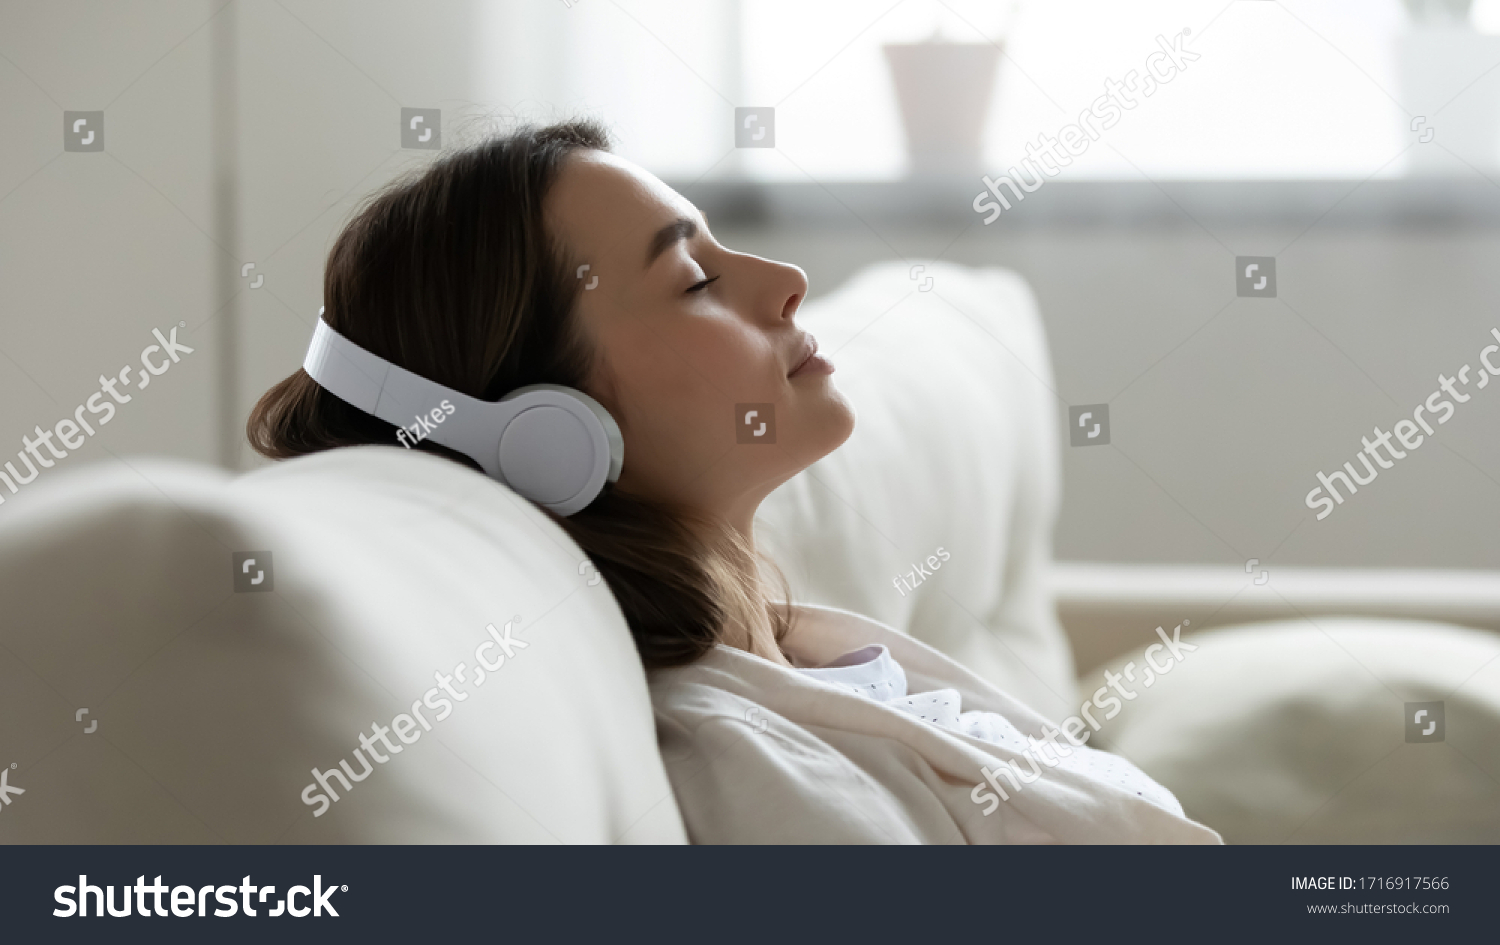 Peaceful girl in modern wireless headphones sit relax on comfortable couch listening to music, happy calm young woman in earphones rest on cozy sofa, enjoy good quality sound, stress free concept #1716917566